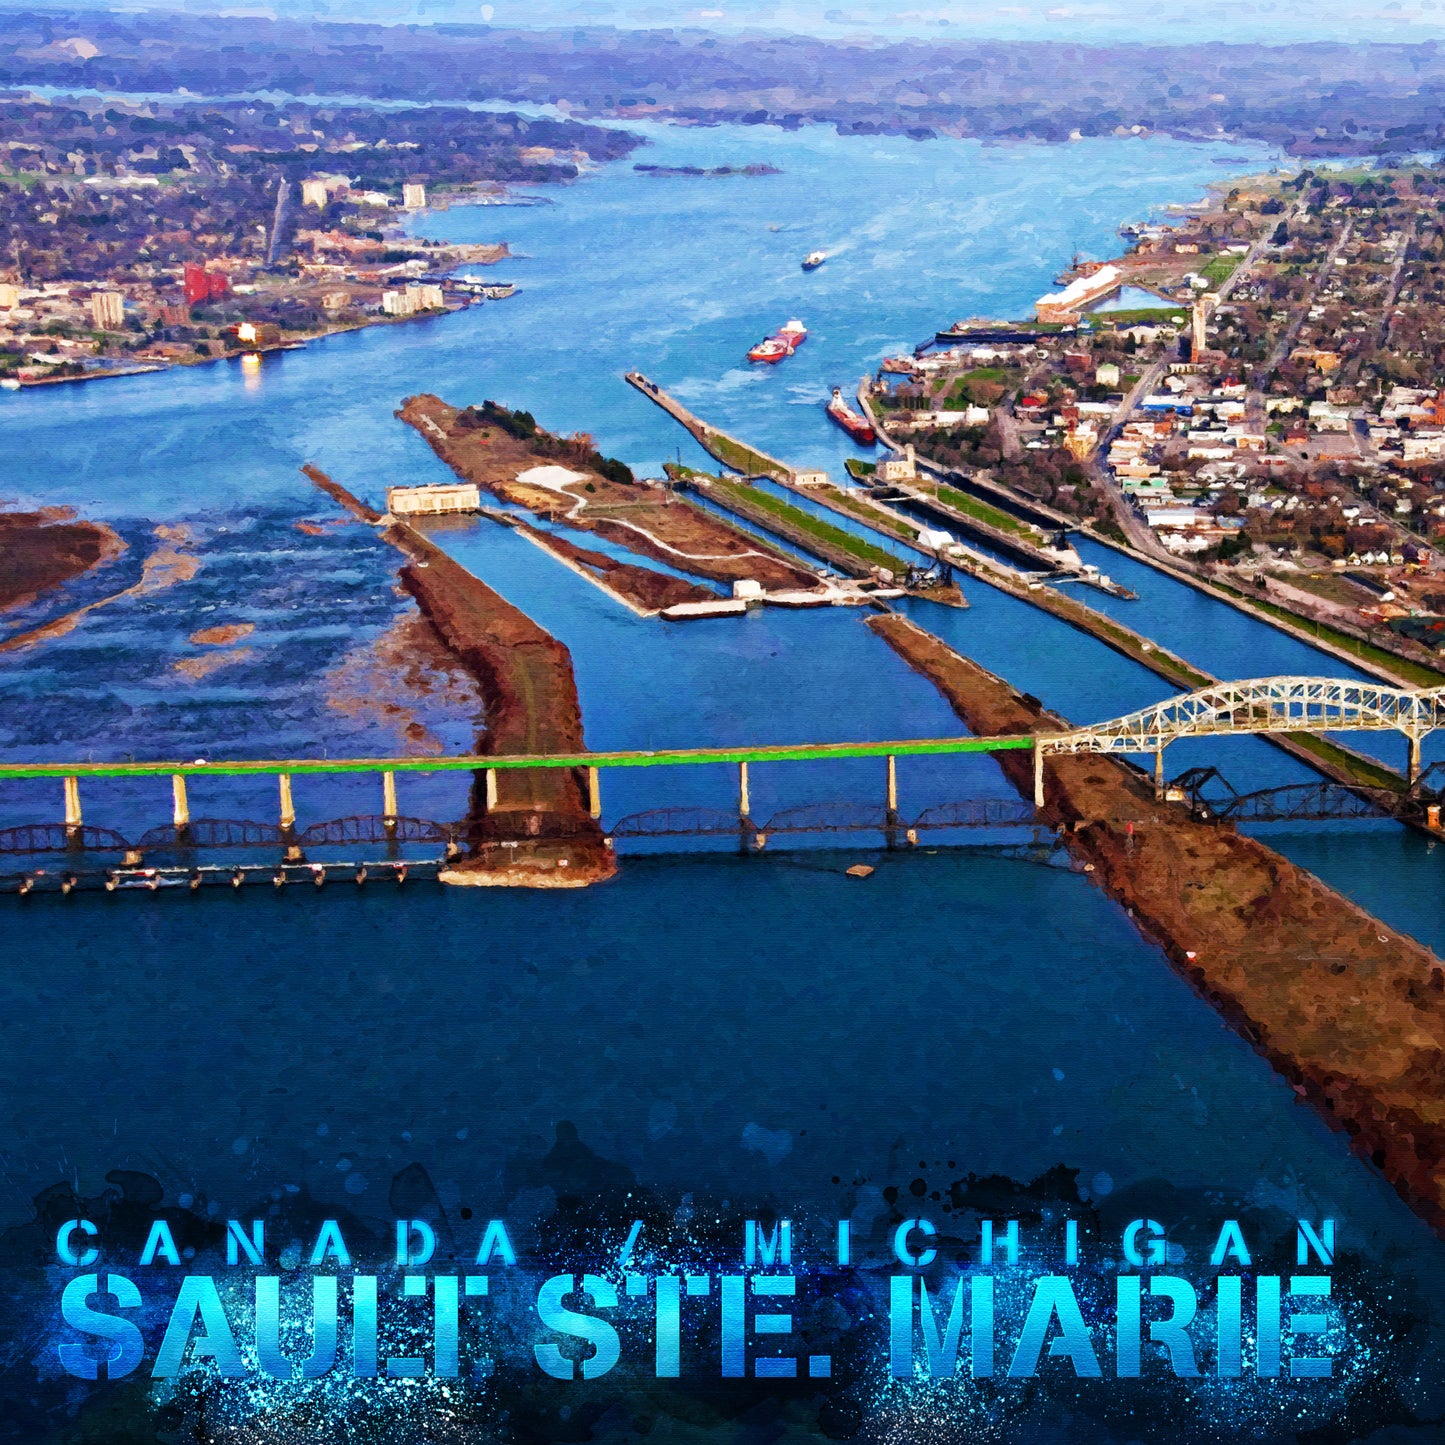 Sault Ste. Marie Michigan and Canada, The Locks